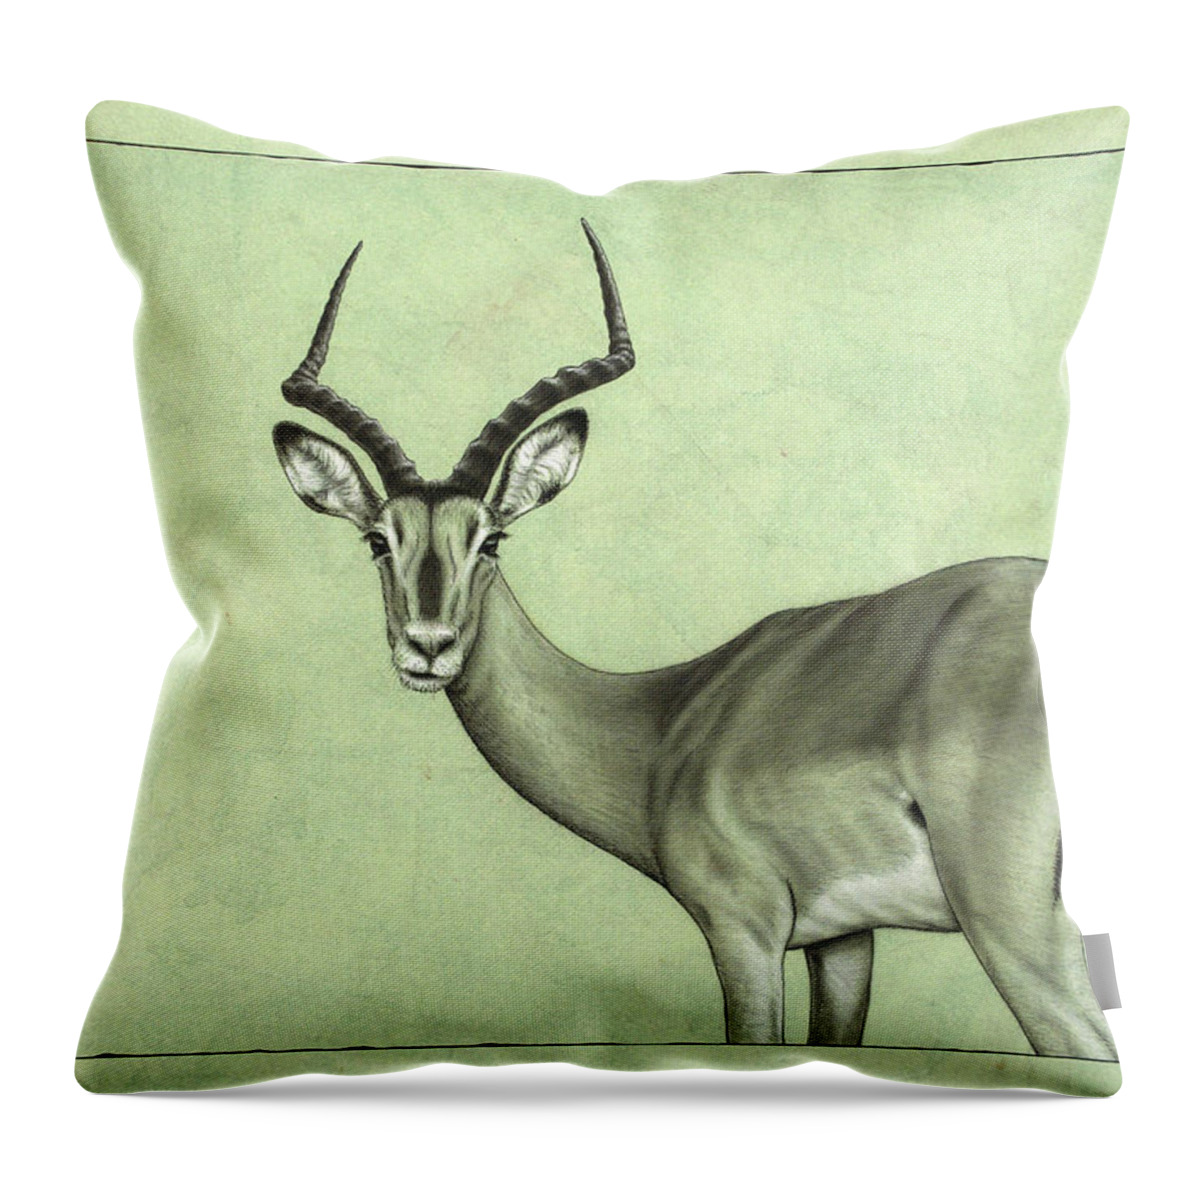 Impala Throw Pillow featuring the painting Impala by James W Johnson